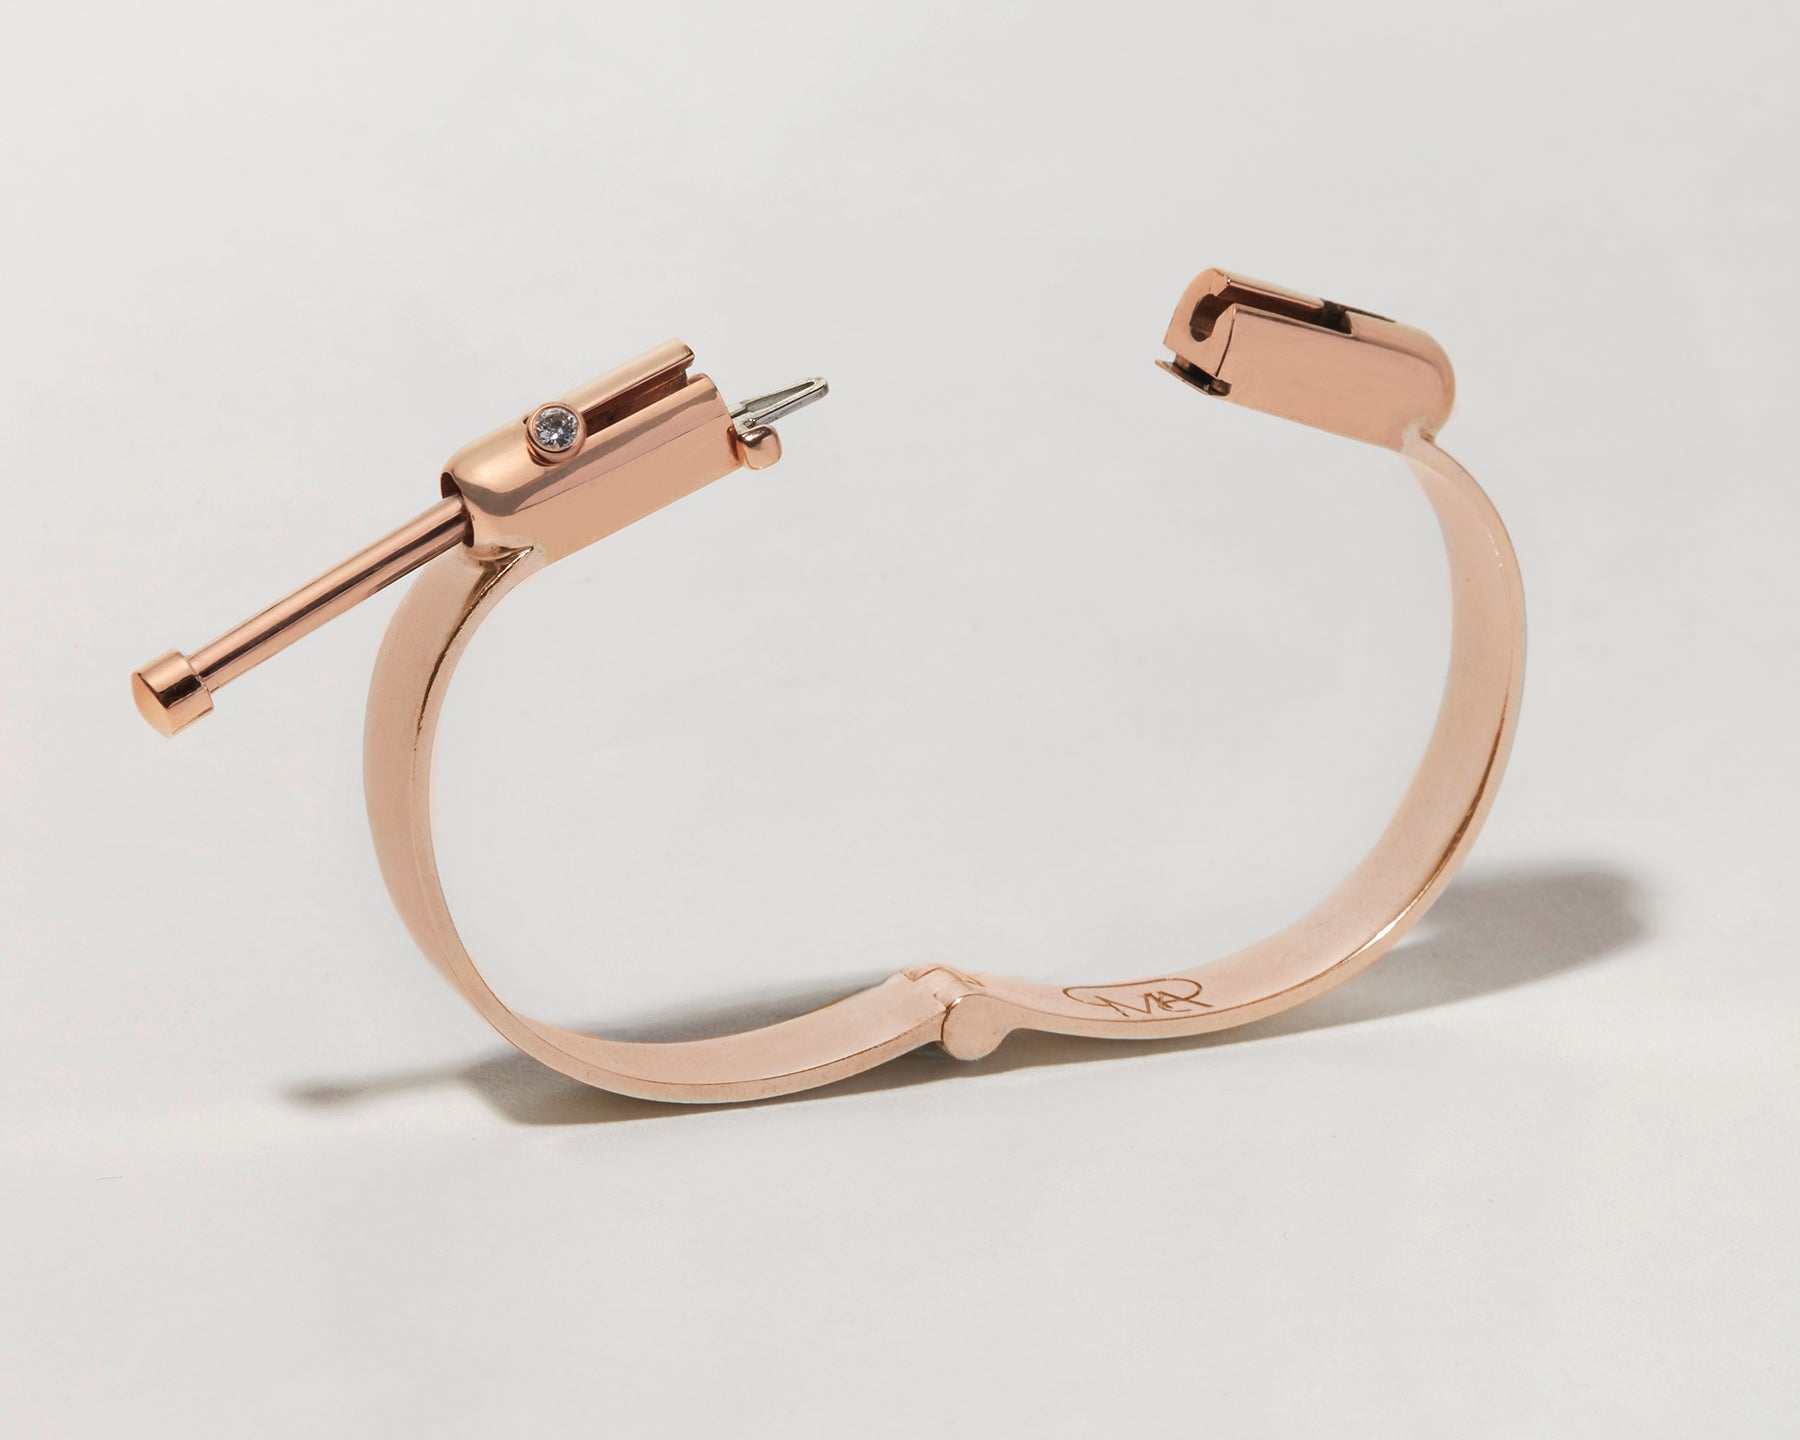 Angled front shot of rose gold clasp bracelet with clasp open against white backdrop